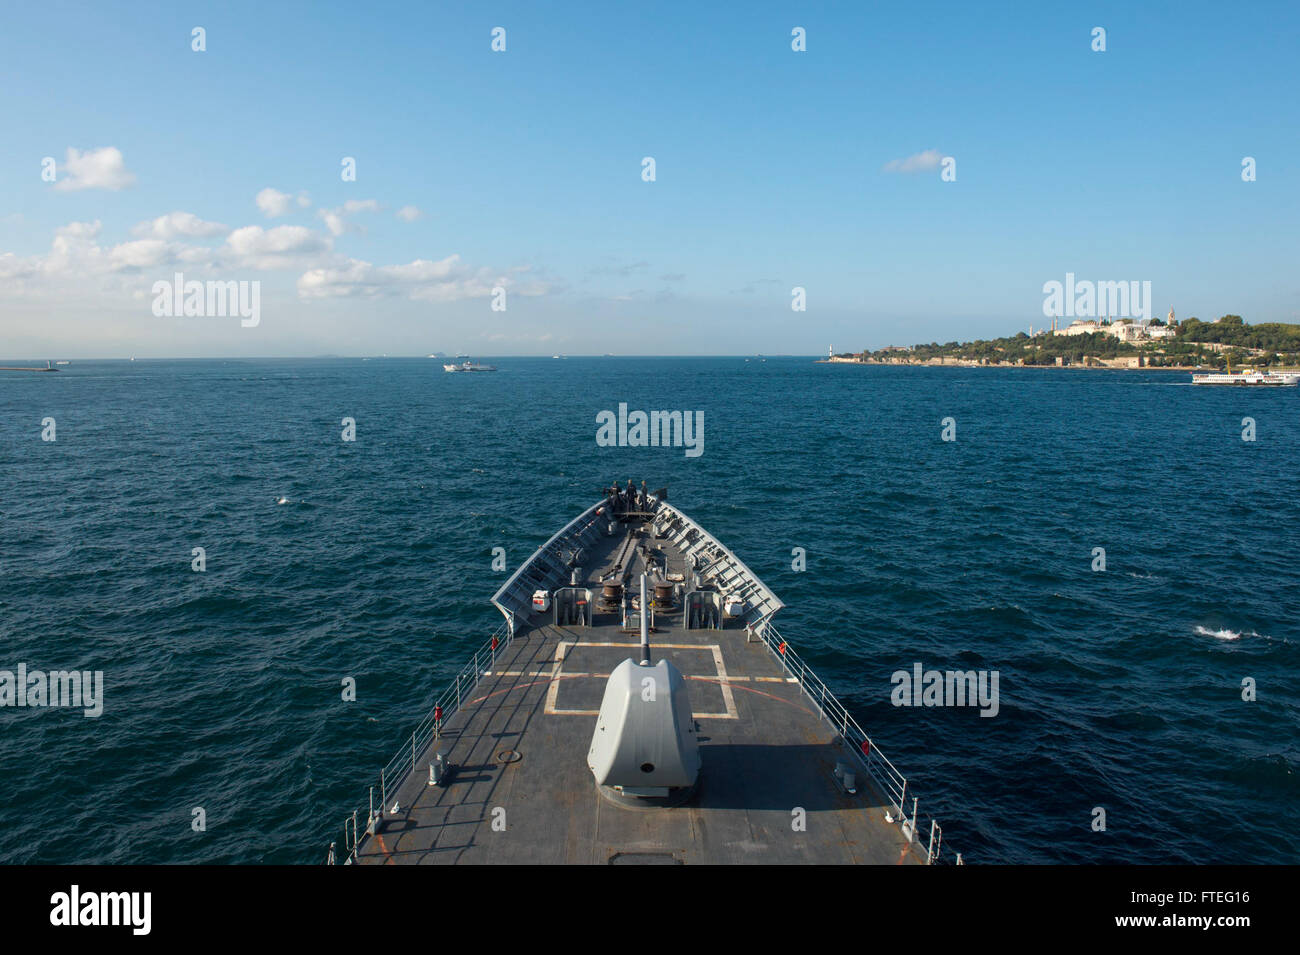 140826-N-ZE250-333 MARMARA SEA (Aug. 26, 2014) The Ticonderoga-class guided-missile cruiser USS Vella Gulf (CG 72) enters the Marmara Sea after departing the Black Sea. Vella Gulf, homeported in Norfolk, Va., is conducting naval operations with allies in the U.S. 6th Fleet area of operations in order to advance security and stability in Europe. (U.S. Navy photo by Mass Communication Specialist 3rd Class Weston Jones/Released) Stock Photo